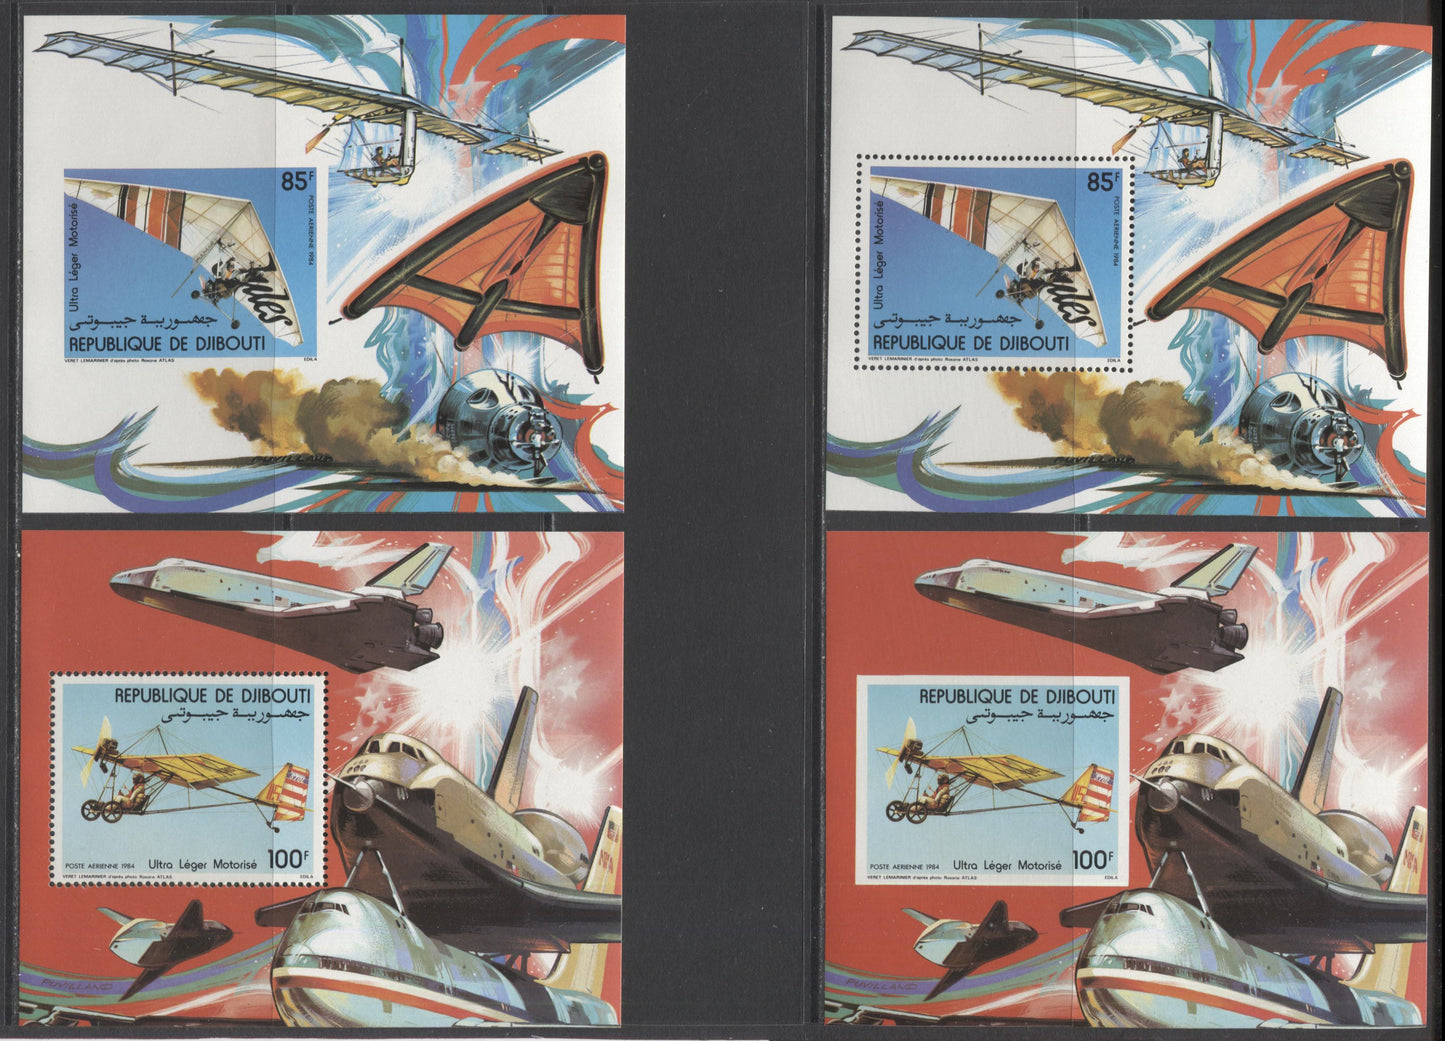 Lot 90 Dijbouti SC#C193/C206 1984 Hang Glider Issue, A VFNH Range Of Bleriot + Imperf & Perf Souvenir Sheets & Sunken Die Proofs, 2017 Scott Cat. $18.5 USD, Click on Listing to See ALL Pictures